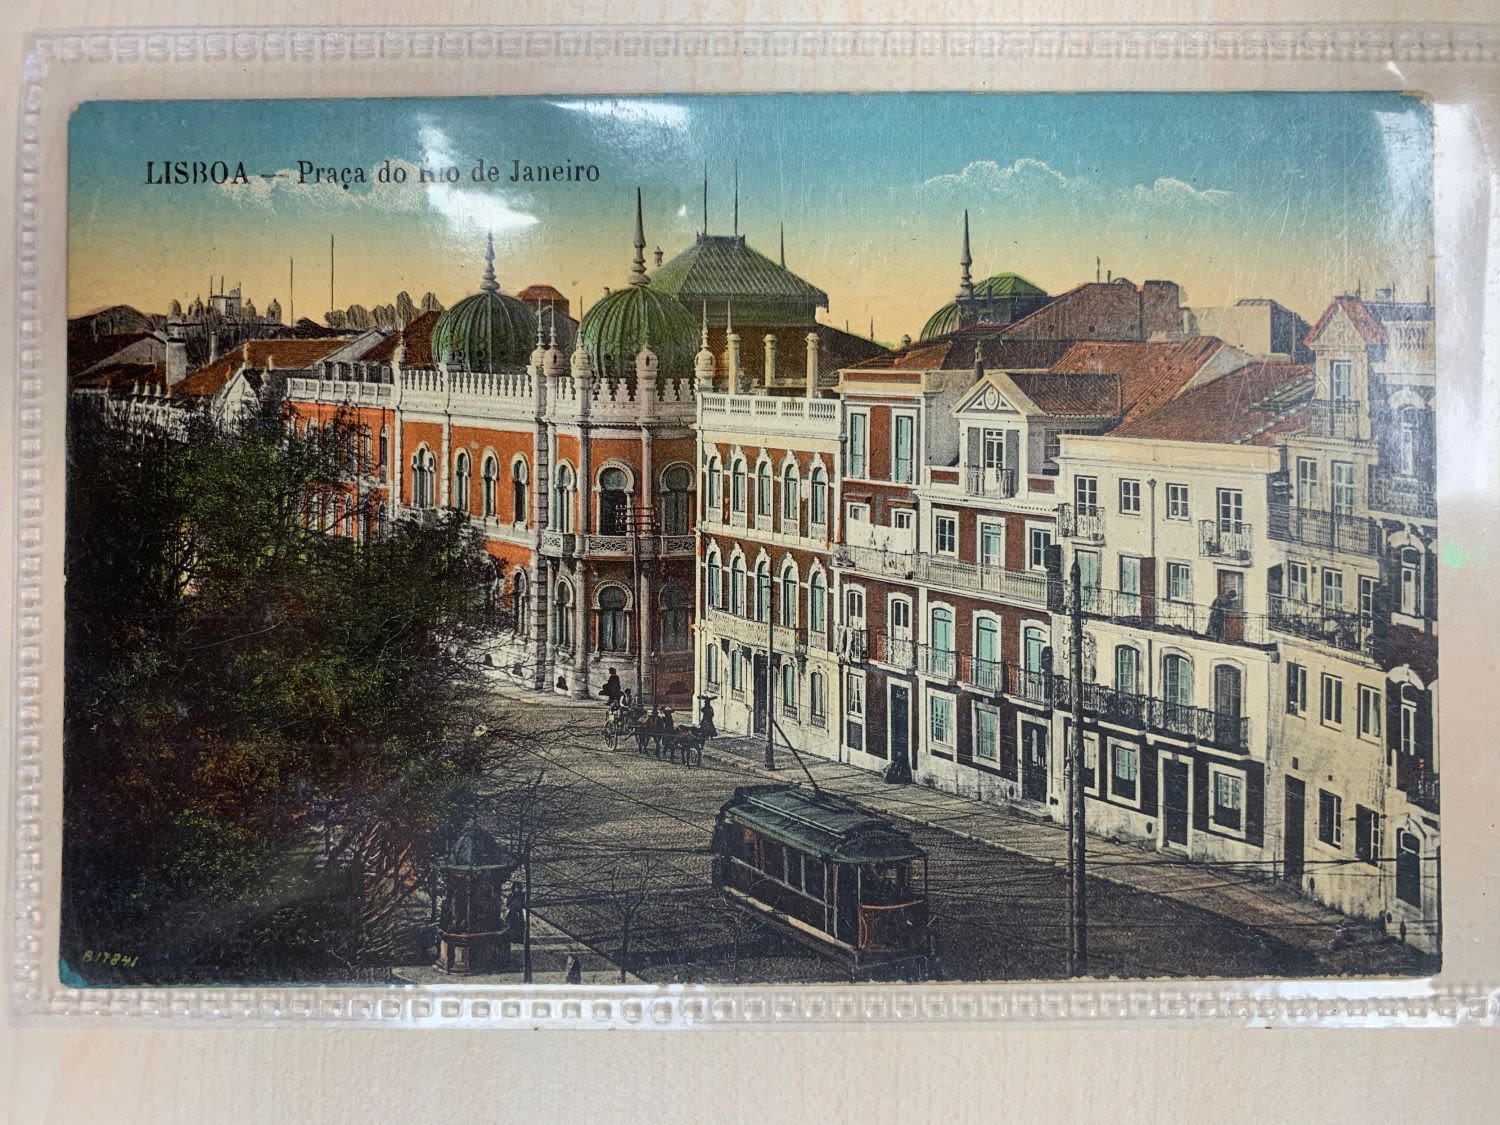 Portugal Postcards. Vintage varied subjects 18 postcards - Image 2 of 7